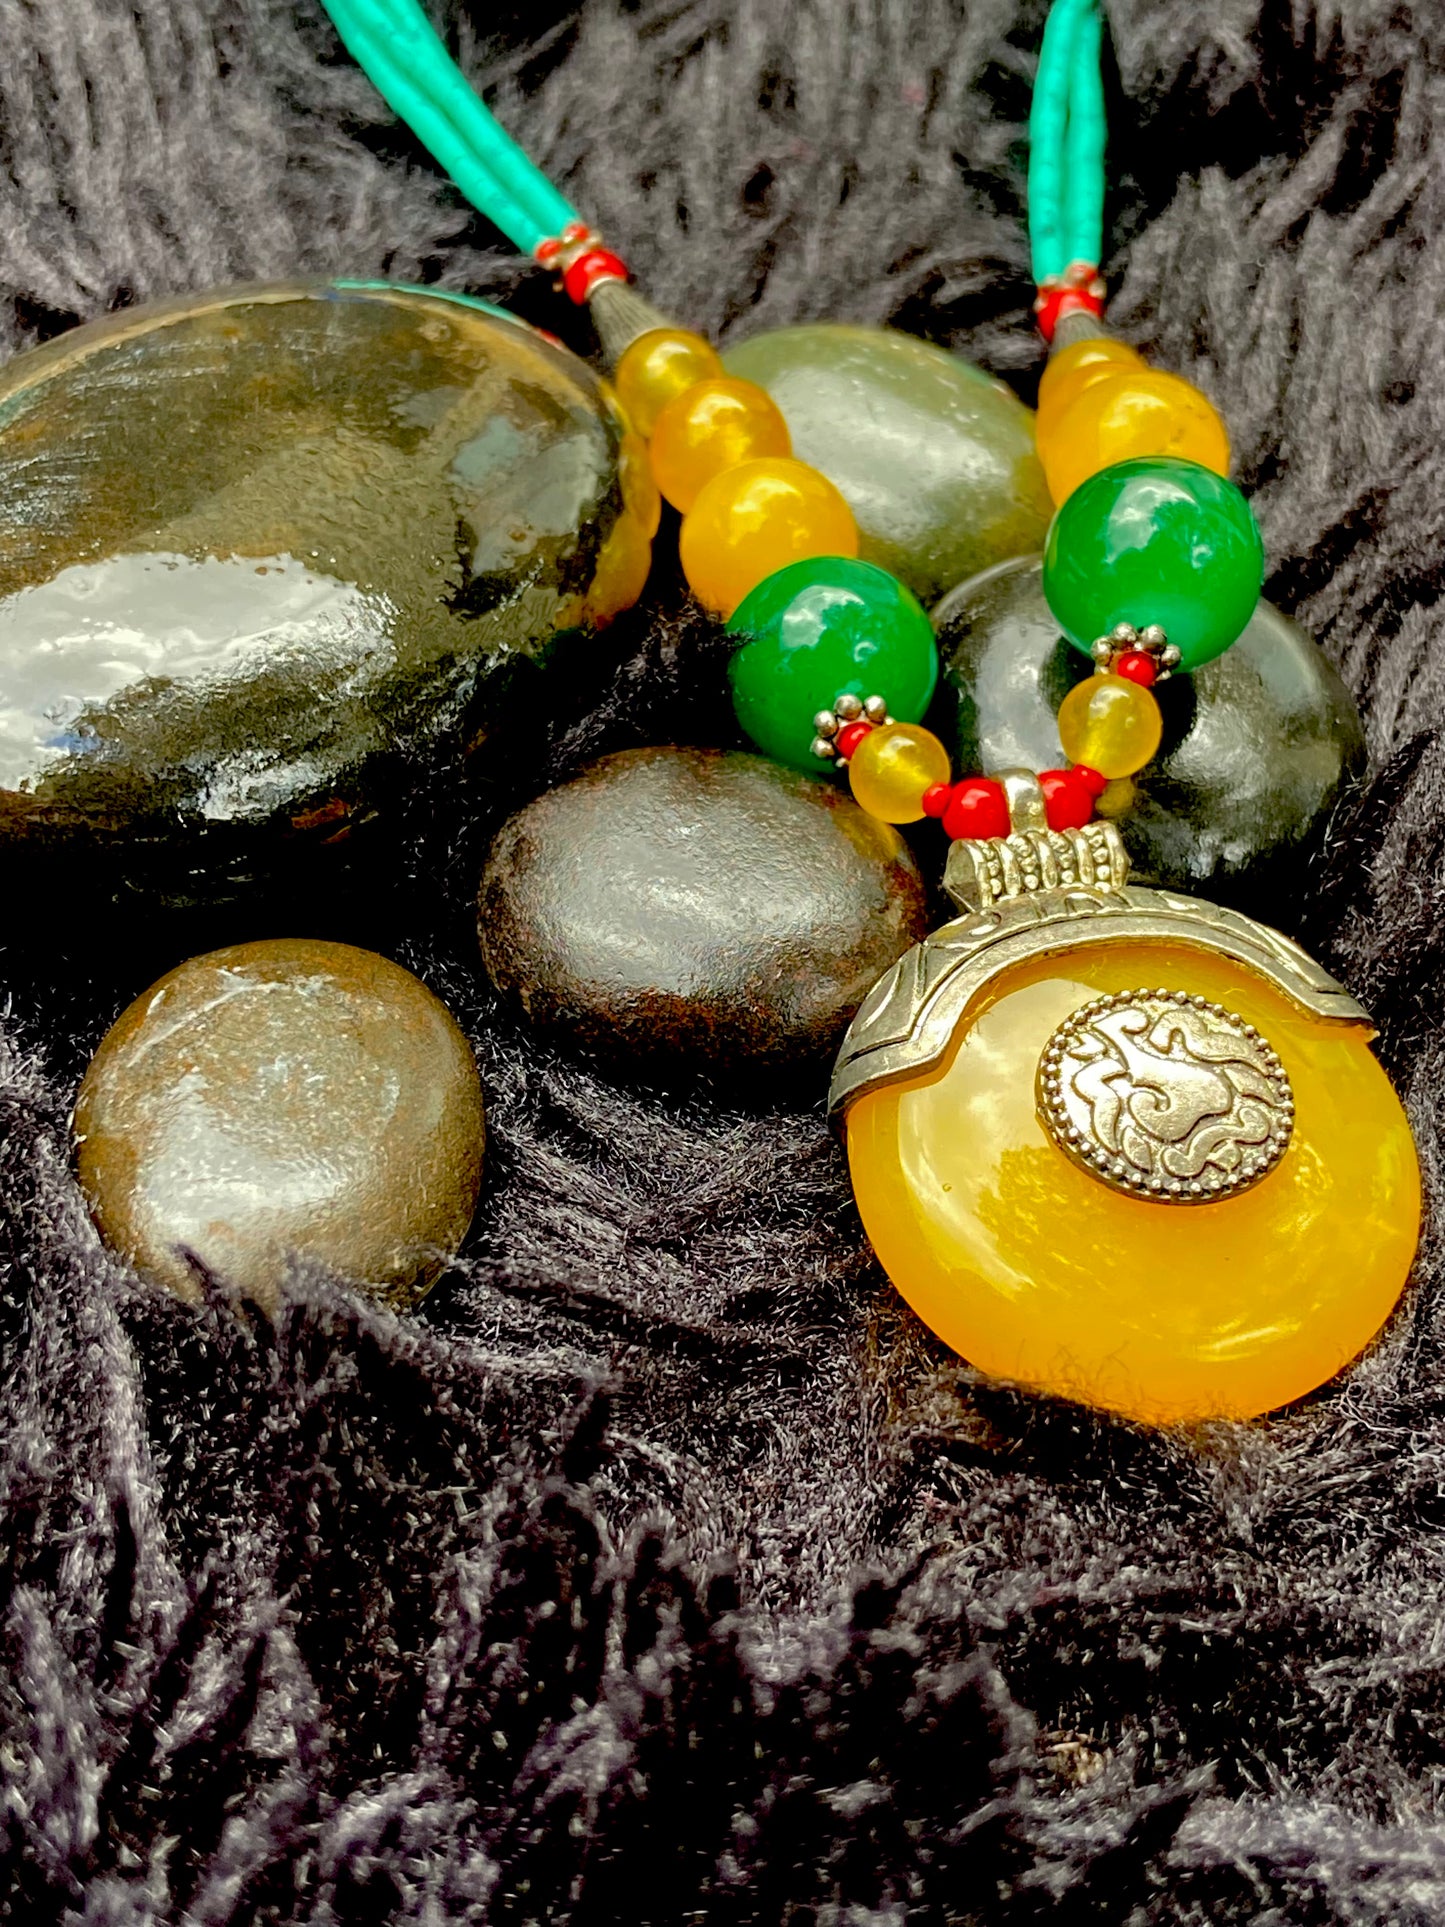 Hand-Made Necklace with natural Stone